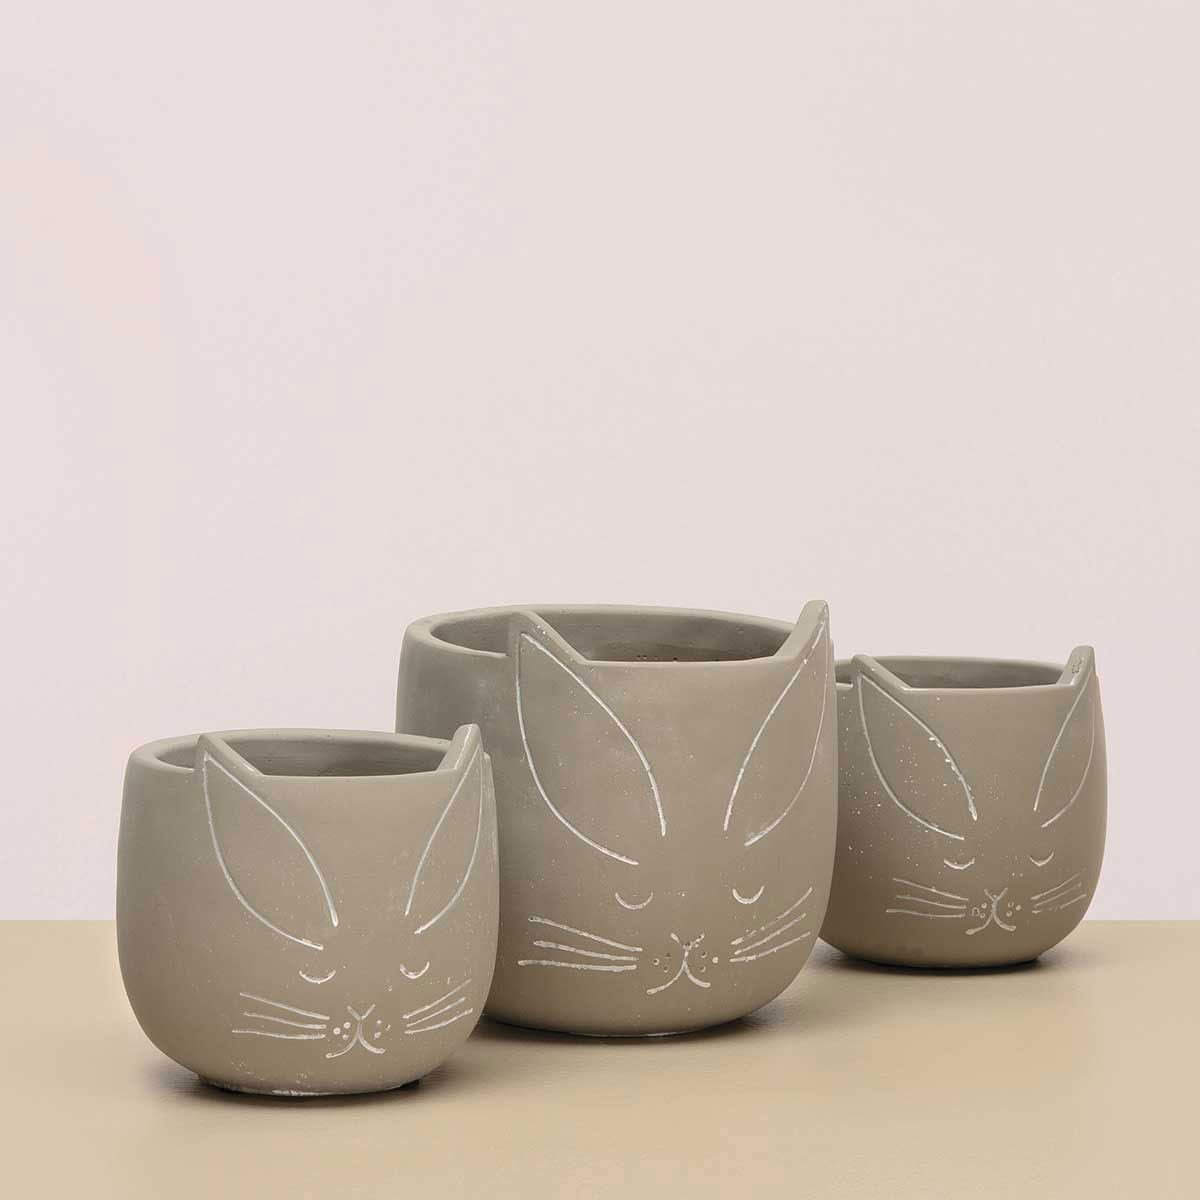 b50 POT BUNNY FACE GREY LARGE 5.5IN X 5.75IN CONCRETE - Click Image to Close